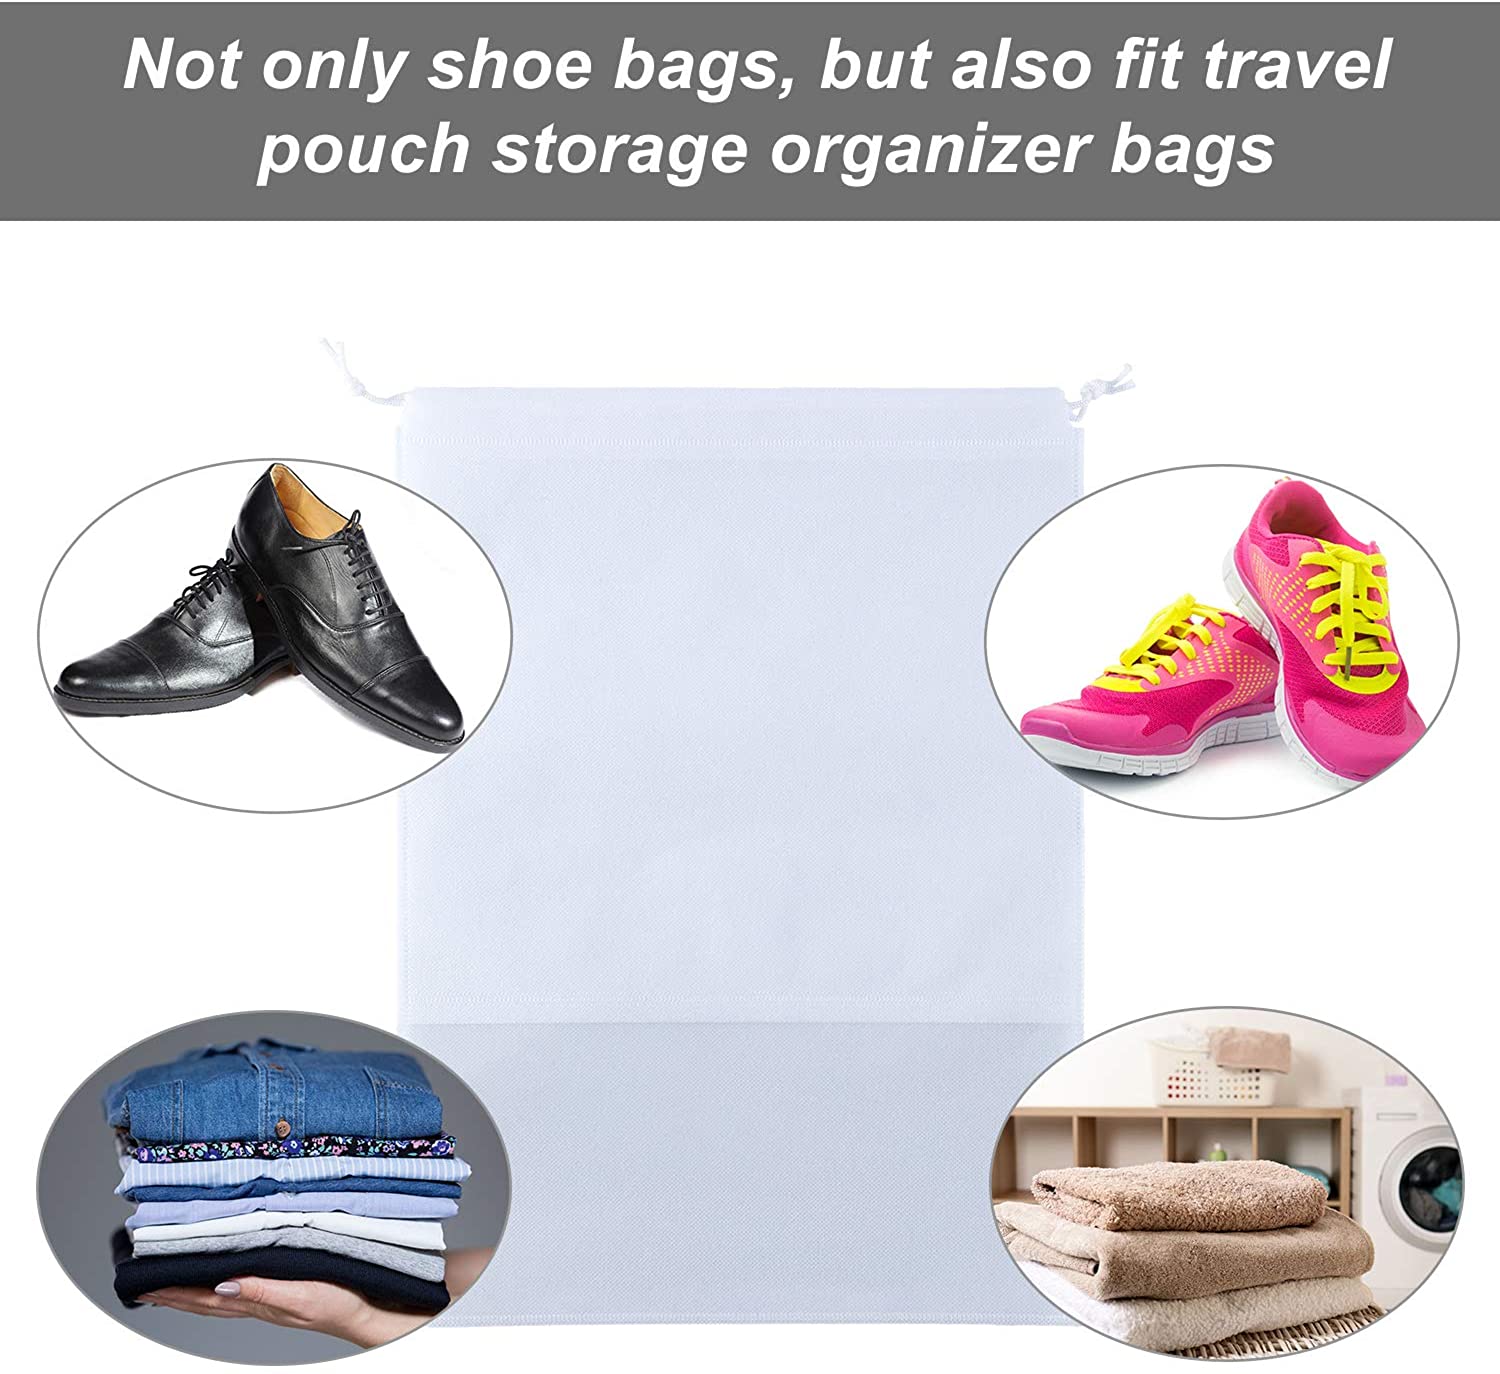 12 Pcs Travel Shoe Bag Non Woven Fabric Storage Bags Dust Bags for Purses  and Handbags Storage, Shoe Travel Bags for Packing, Home Closet Organizer  Dust Cover - White 